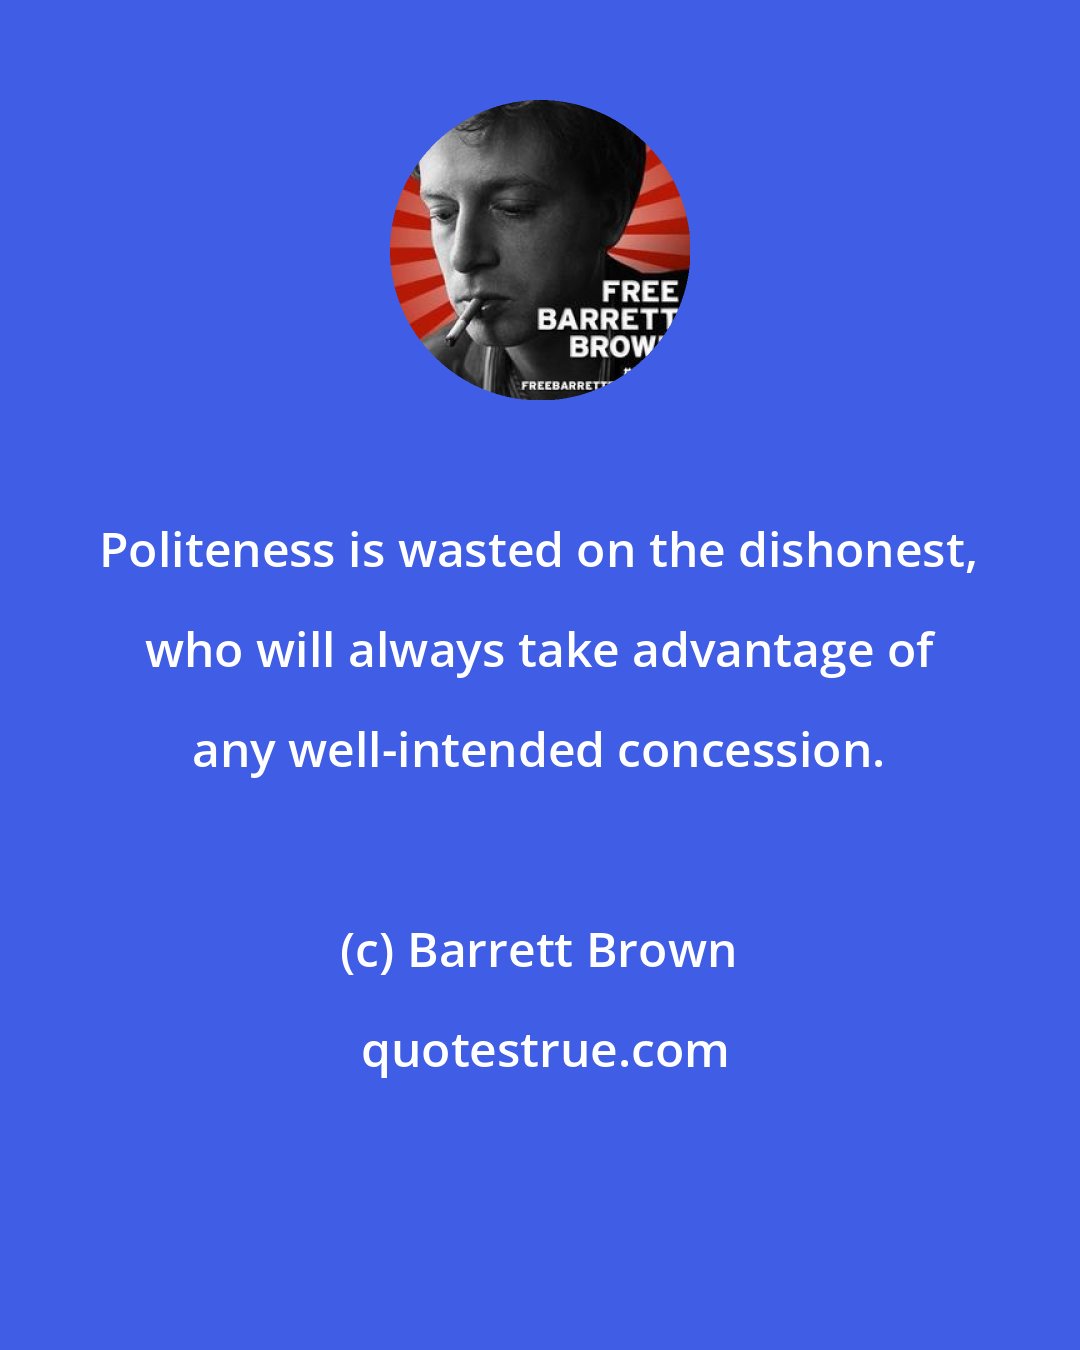 Barrett Brown: Politeness is wasted on the dishonest, who will always take advantage of any well-intended concession.